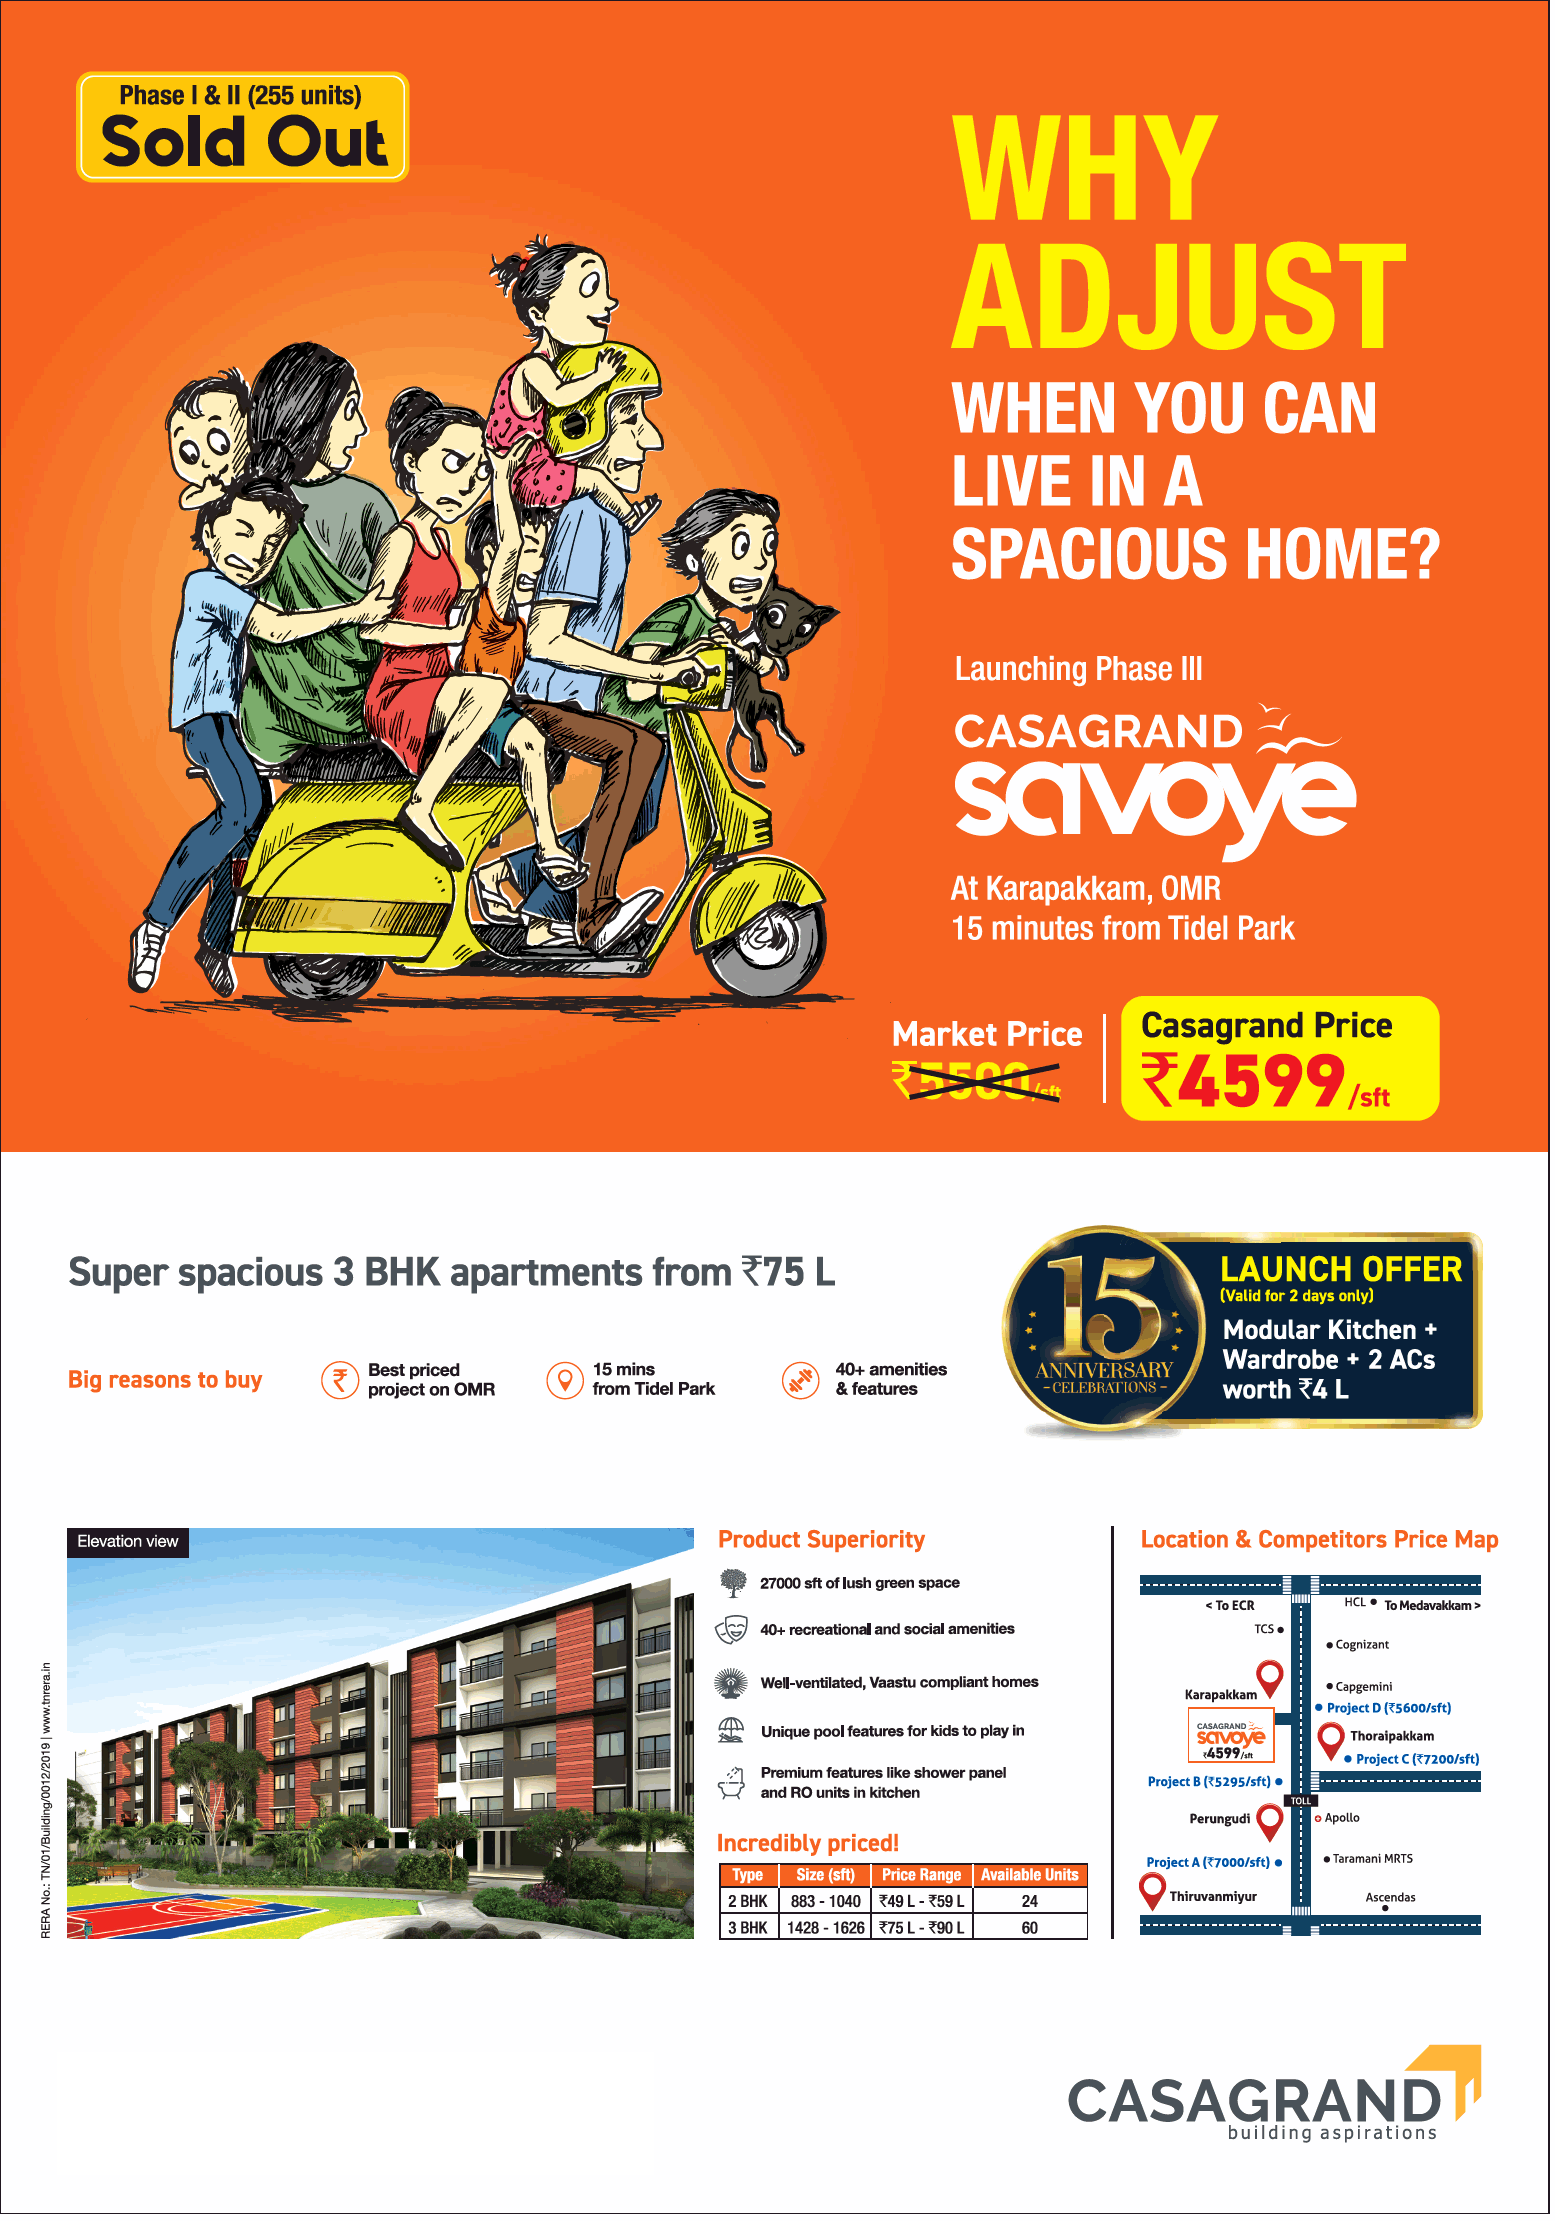 Super spacious 3 BHK apartments from Rs 75 Lac at Casagrand Savoye, Chennai Update